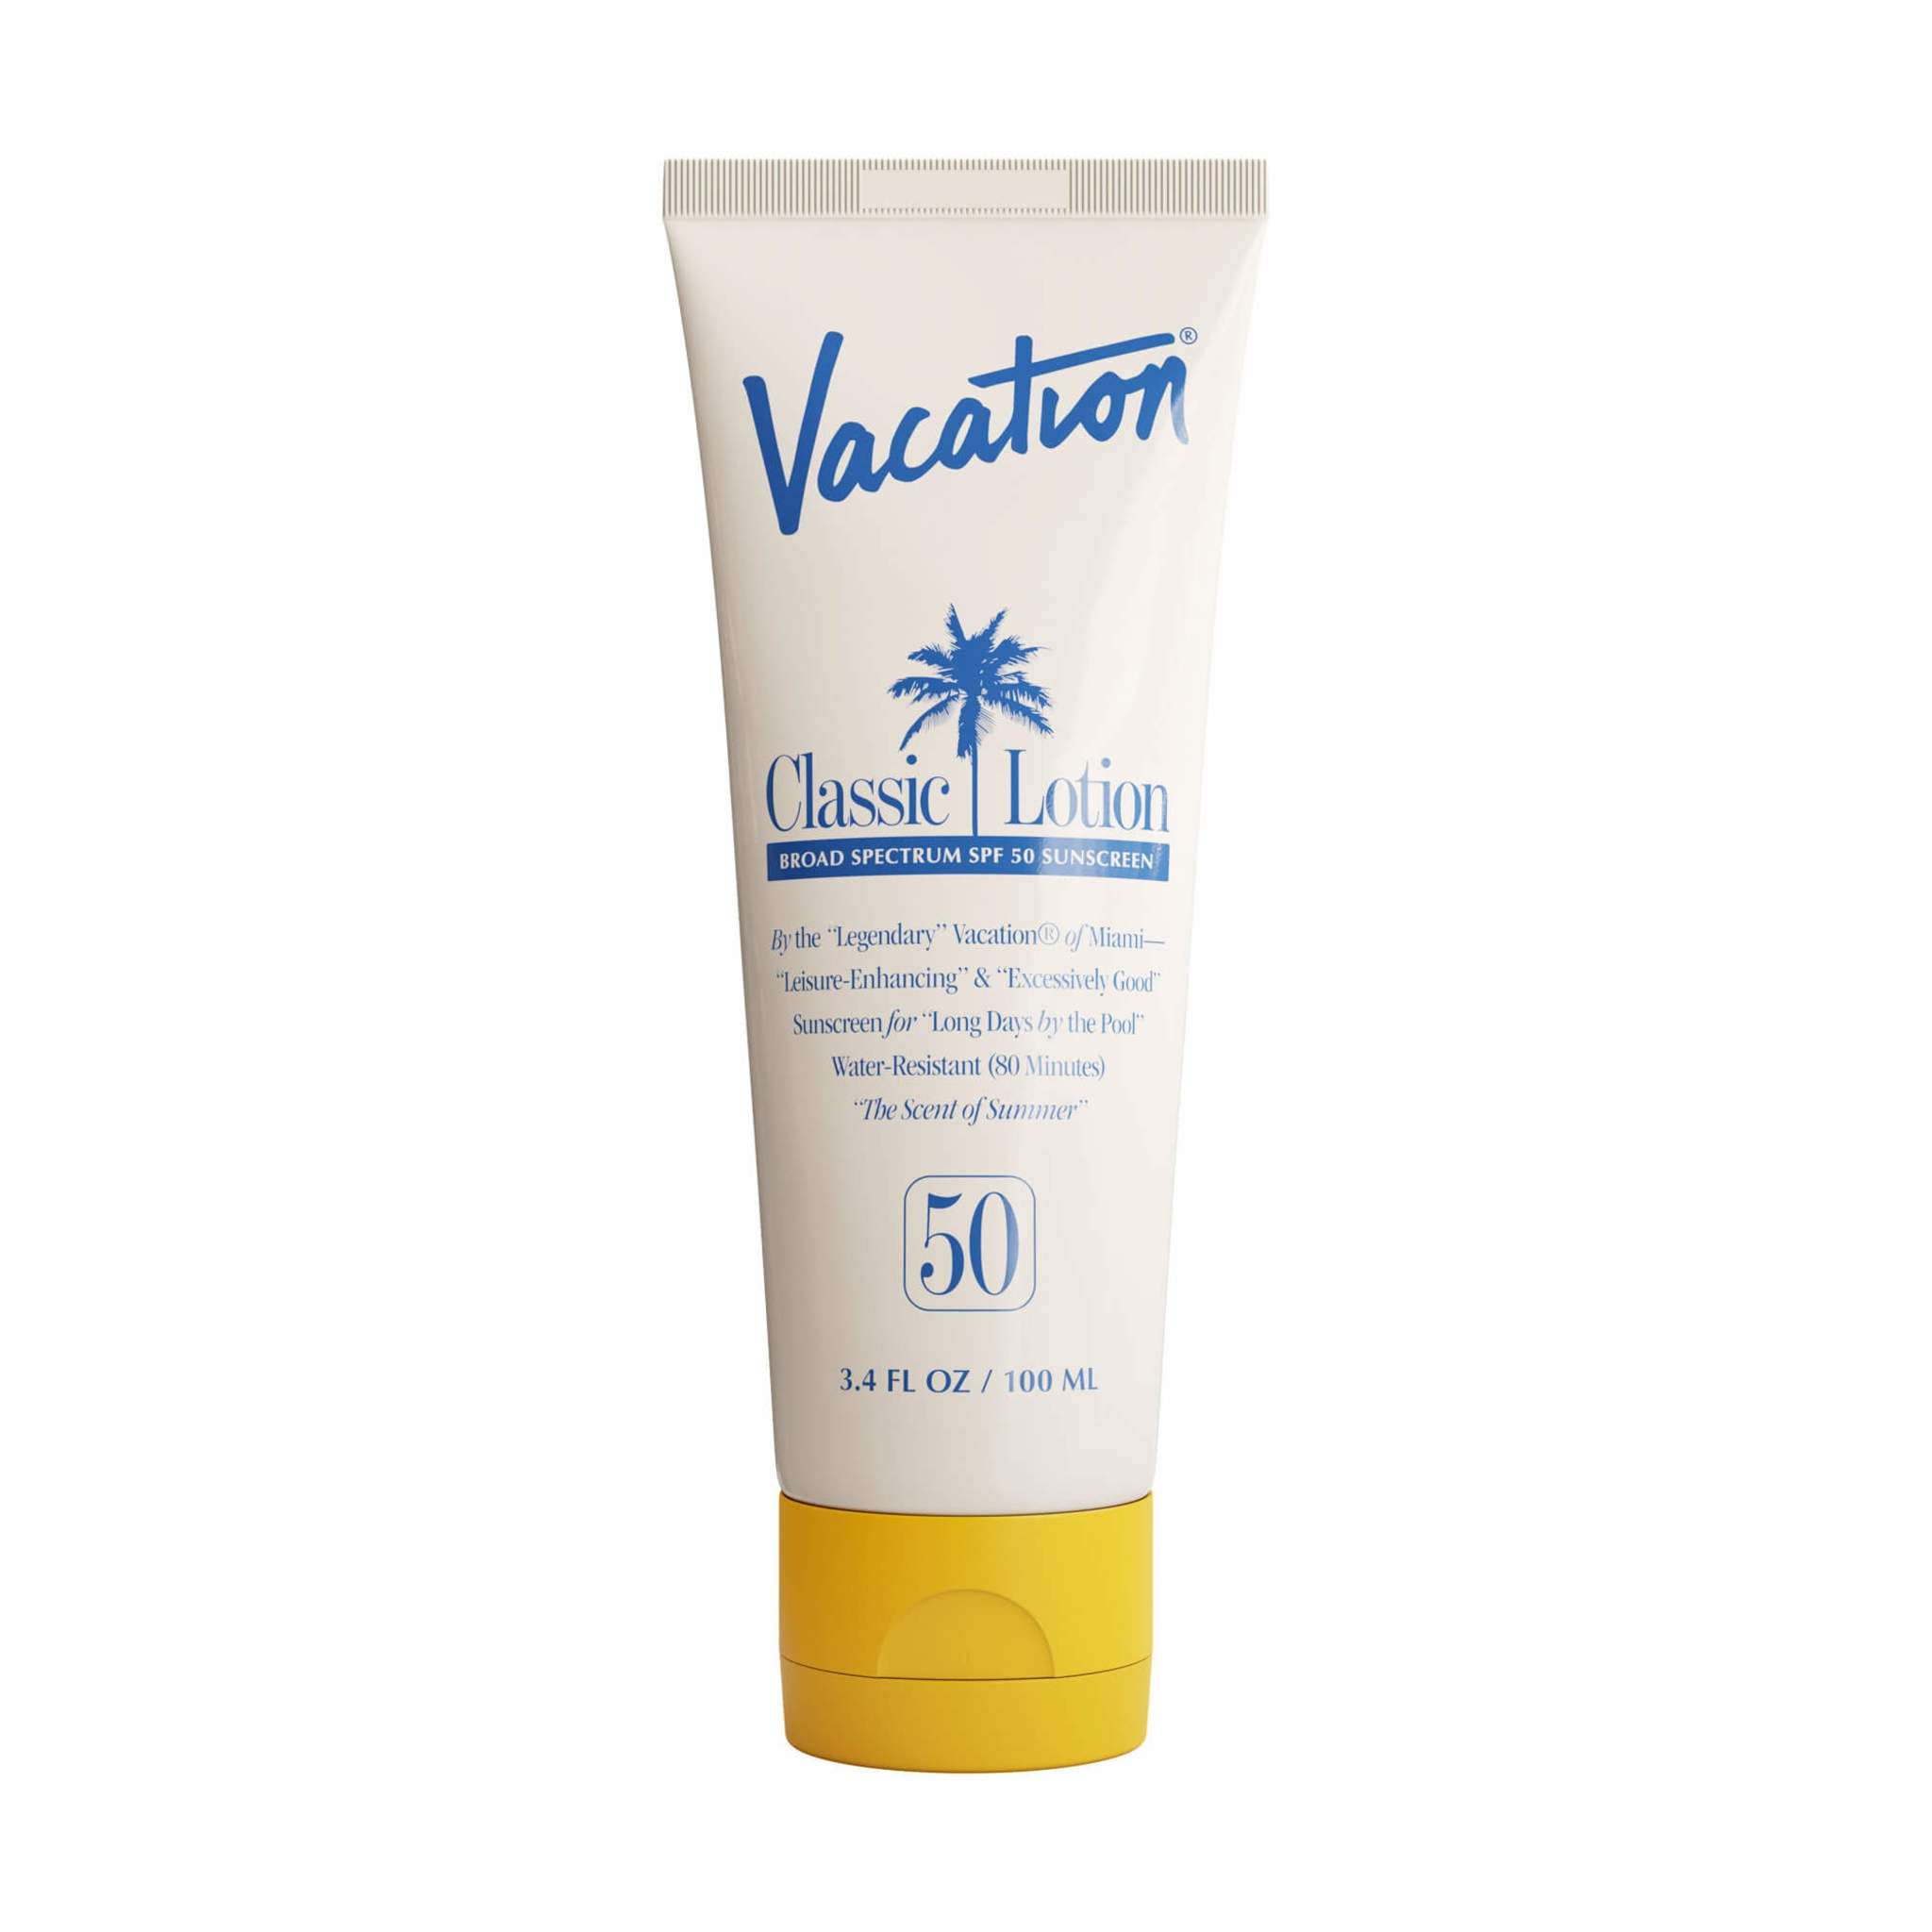 Vacation Classic Lotion SPF 50 main image.